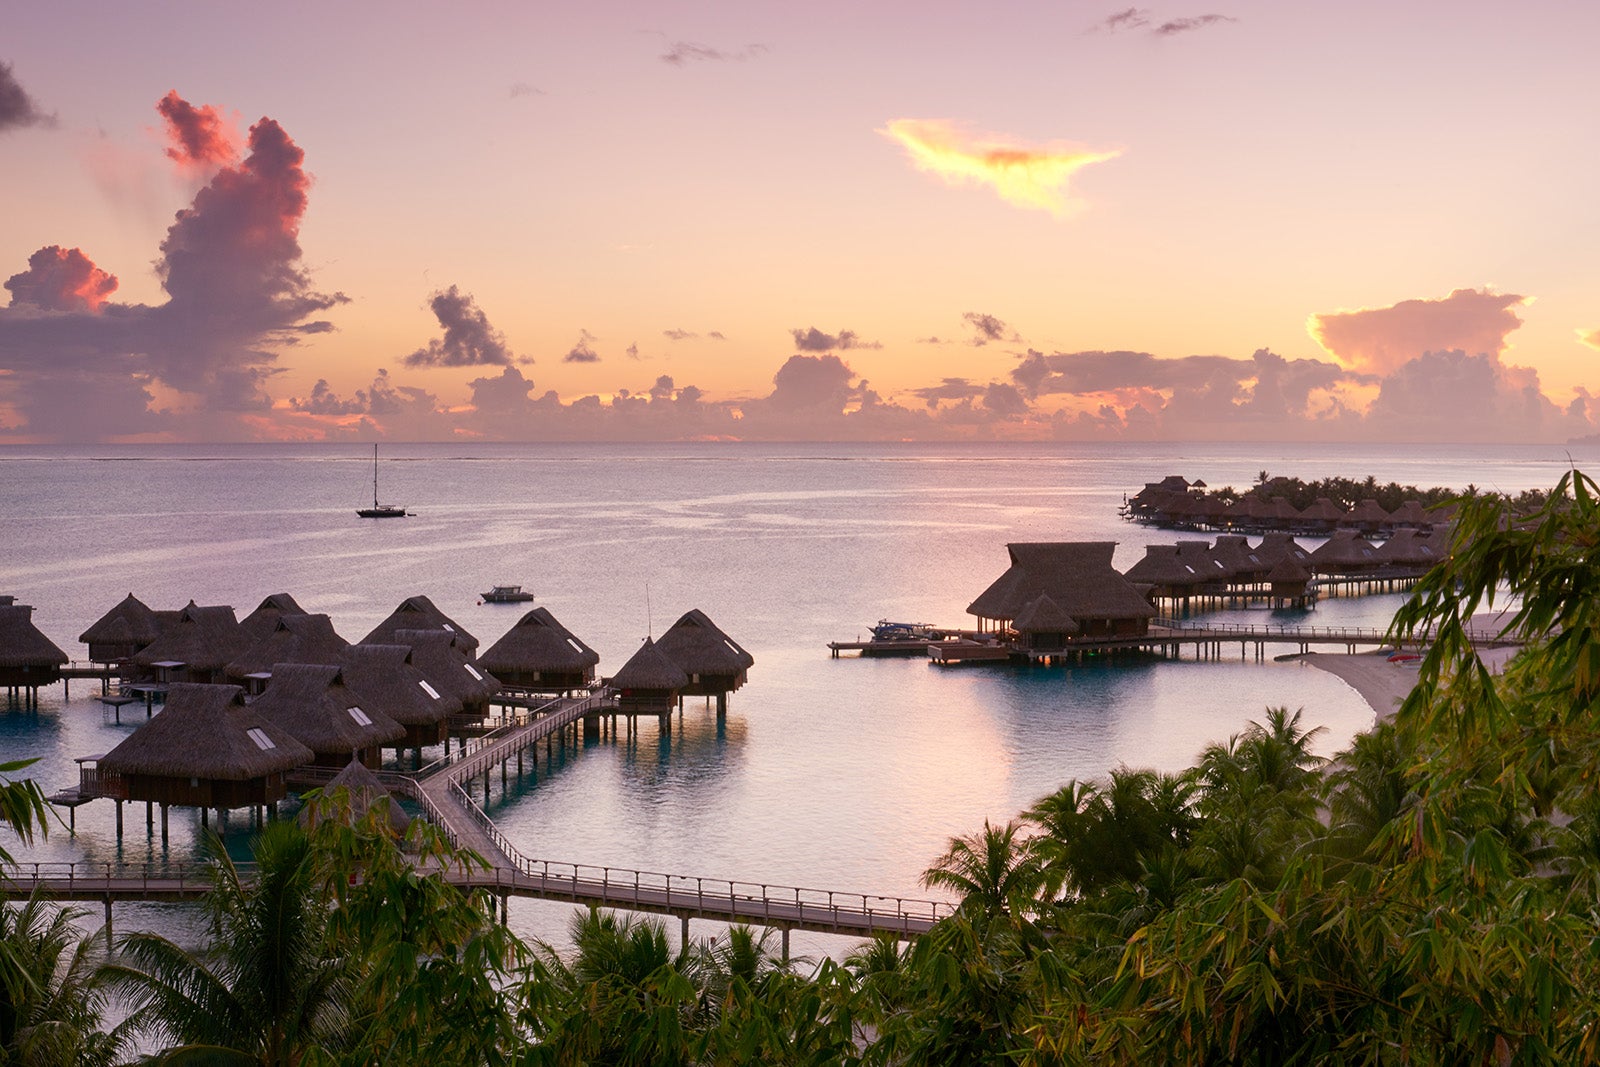 Citi Journey canceled this couple’s Bora Bora overwater bungalow. What may they do?